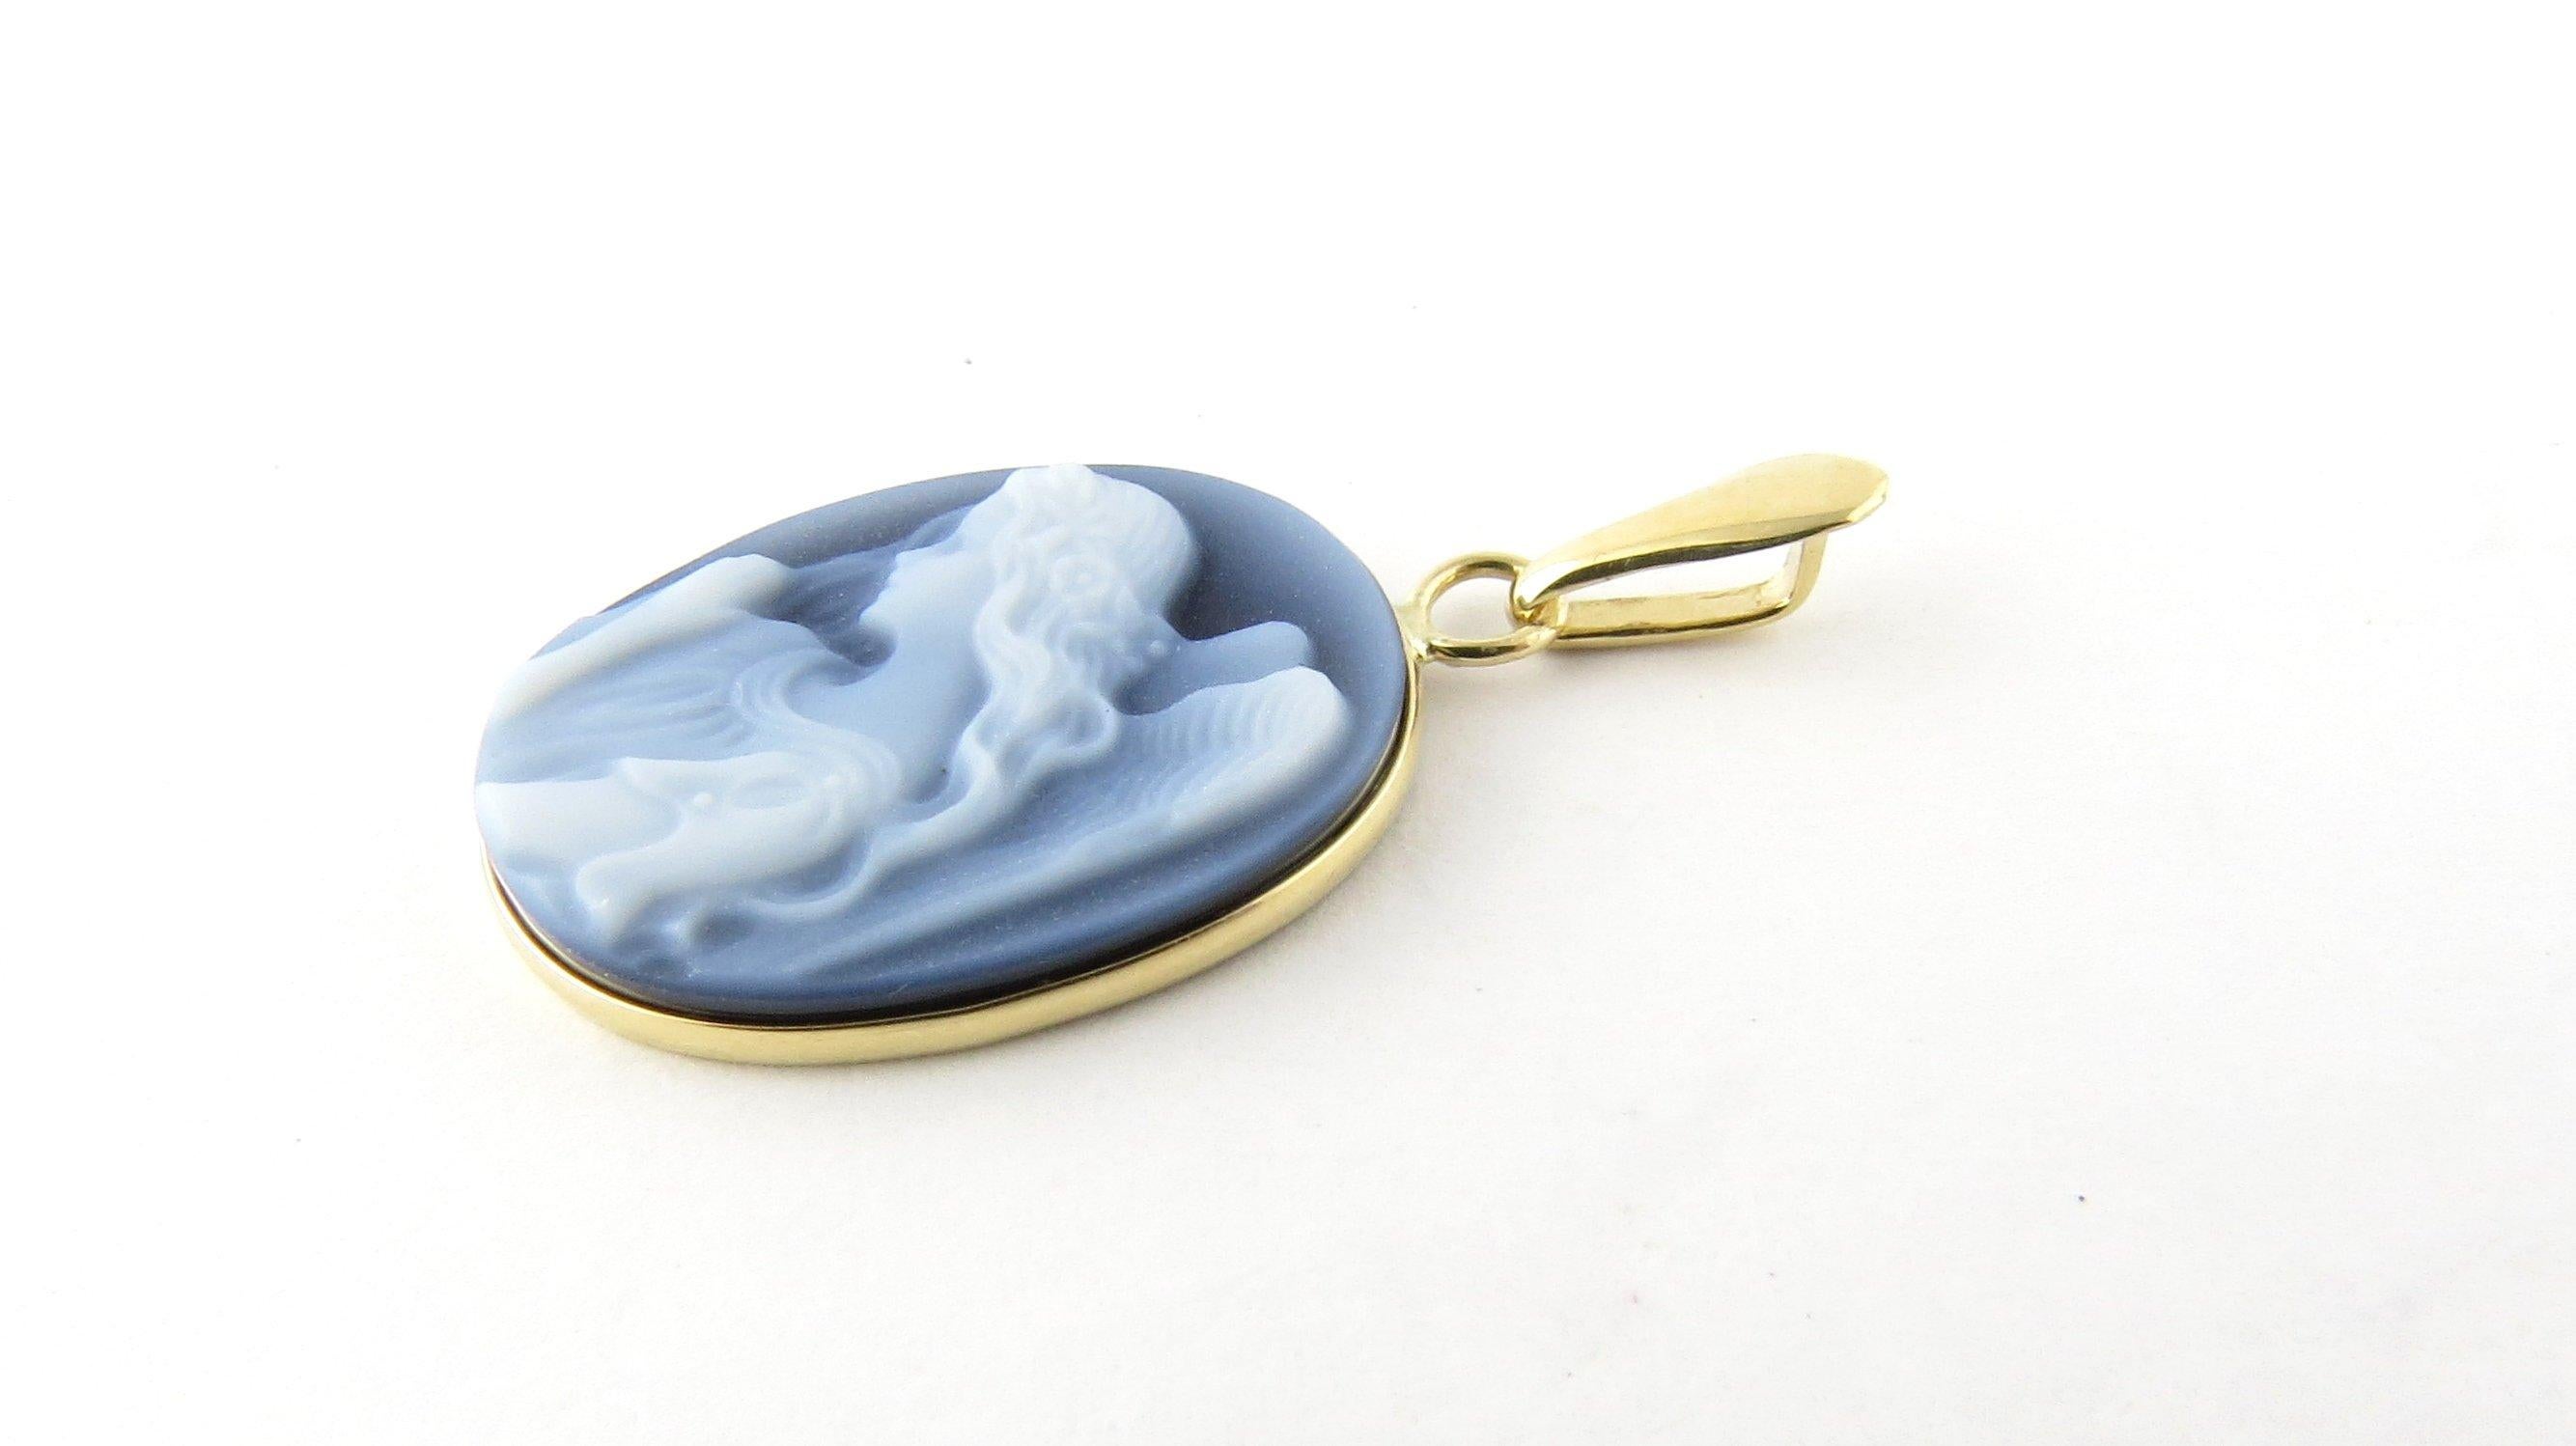 Vintage 14 Karat Yellow Gold Blue Agate Guardian Angel Charm-

This lovely blue agate cameo pendant features an ethereal angel framed in classic 14K yellow gold.

Size: 22 mm x 13 mm

Weight: 0.9 dwt. / 1.5 gr.

Hallmark: 14K

Very good condition,